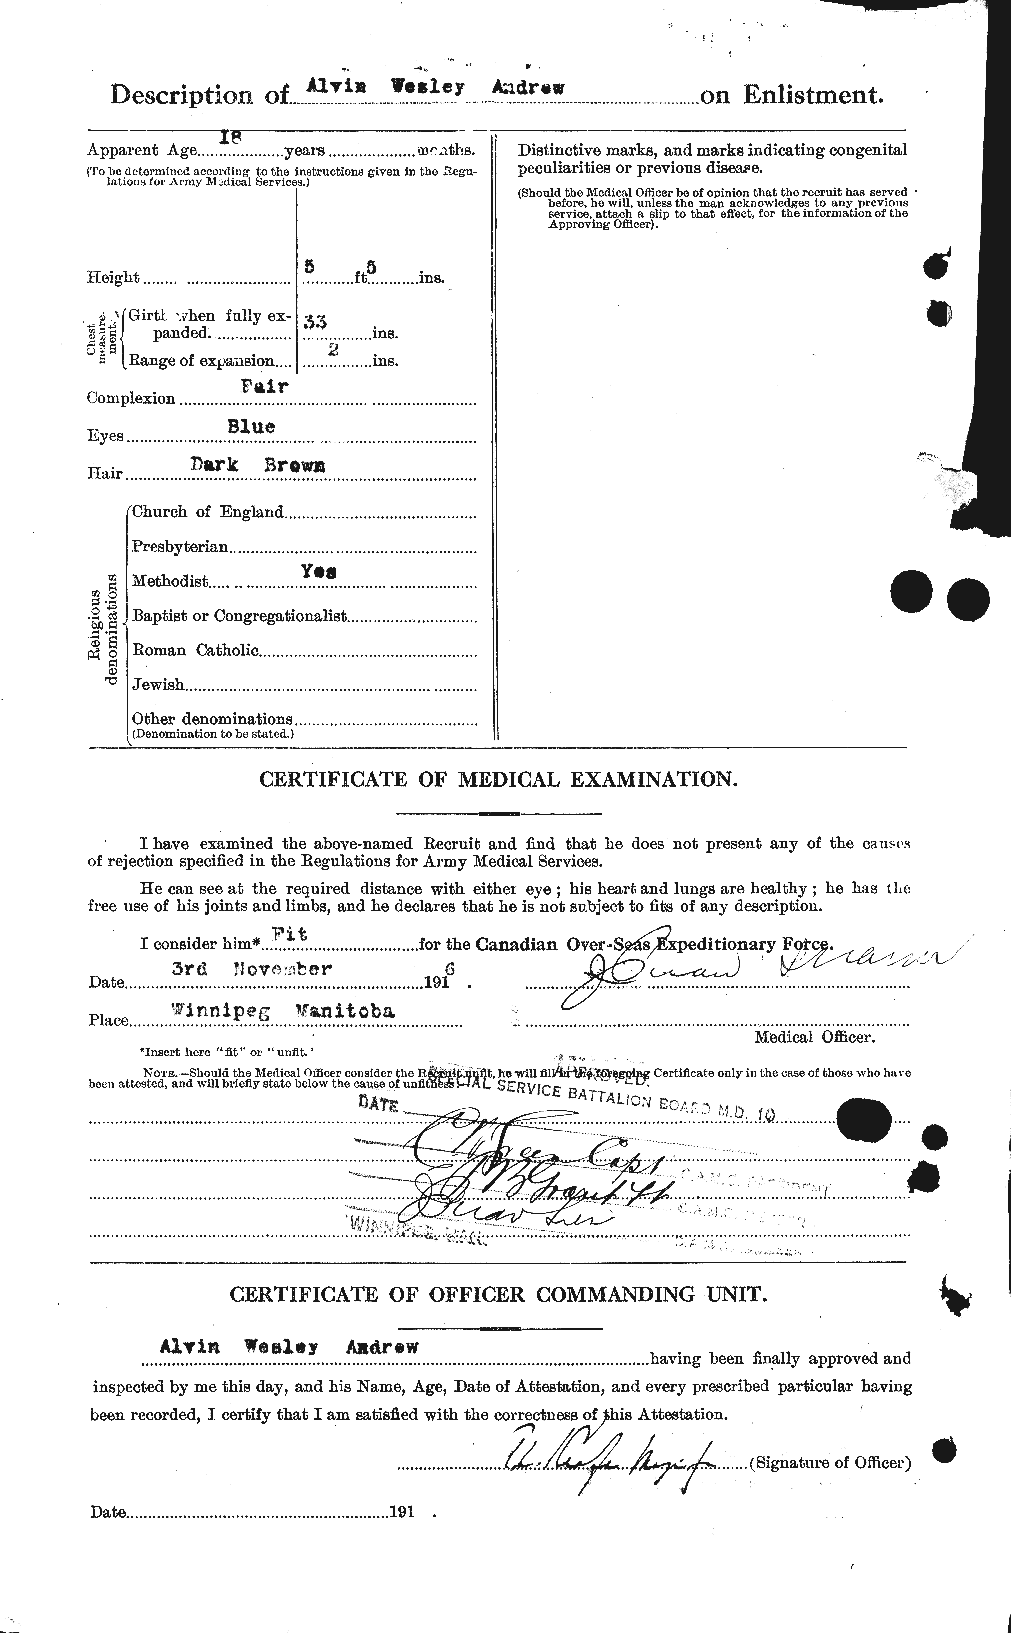 Personnel Records of the First World War - CEF 210949b